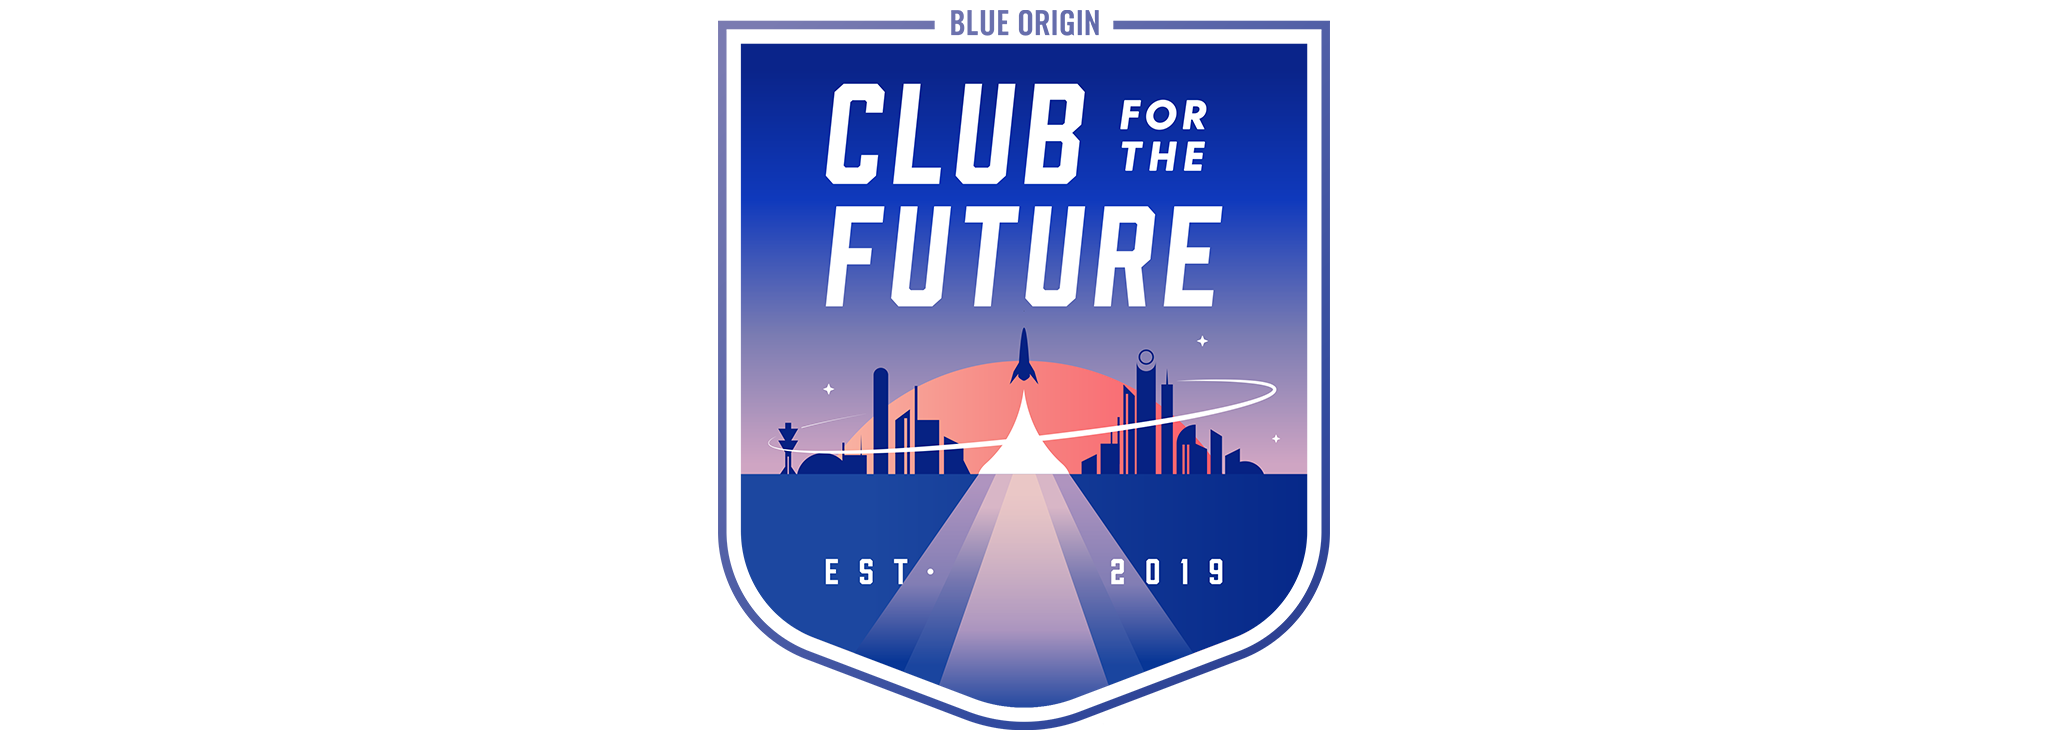 https://challenger.org/wp-content/uploads/2021/07/Blue-Origin_Club-for-the-Future.png